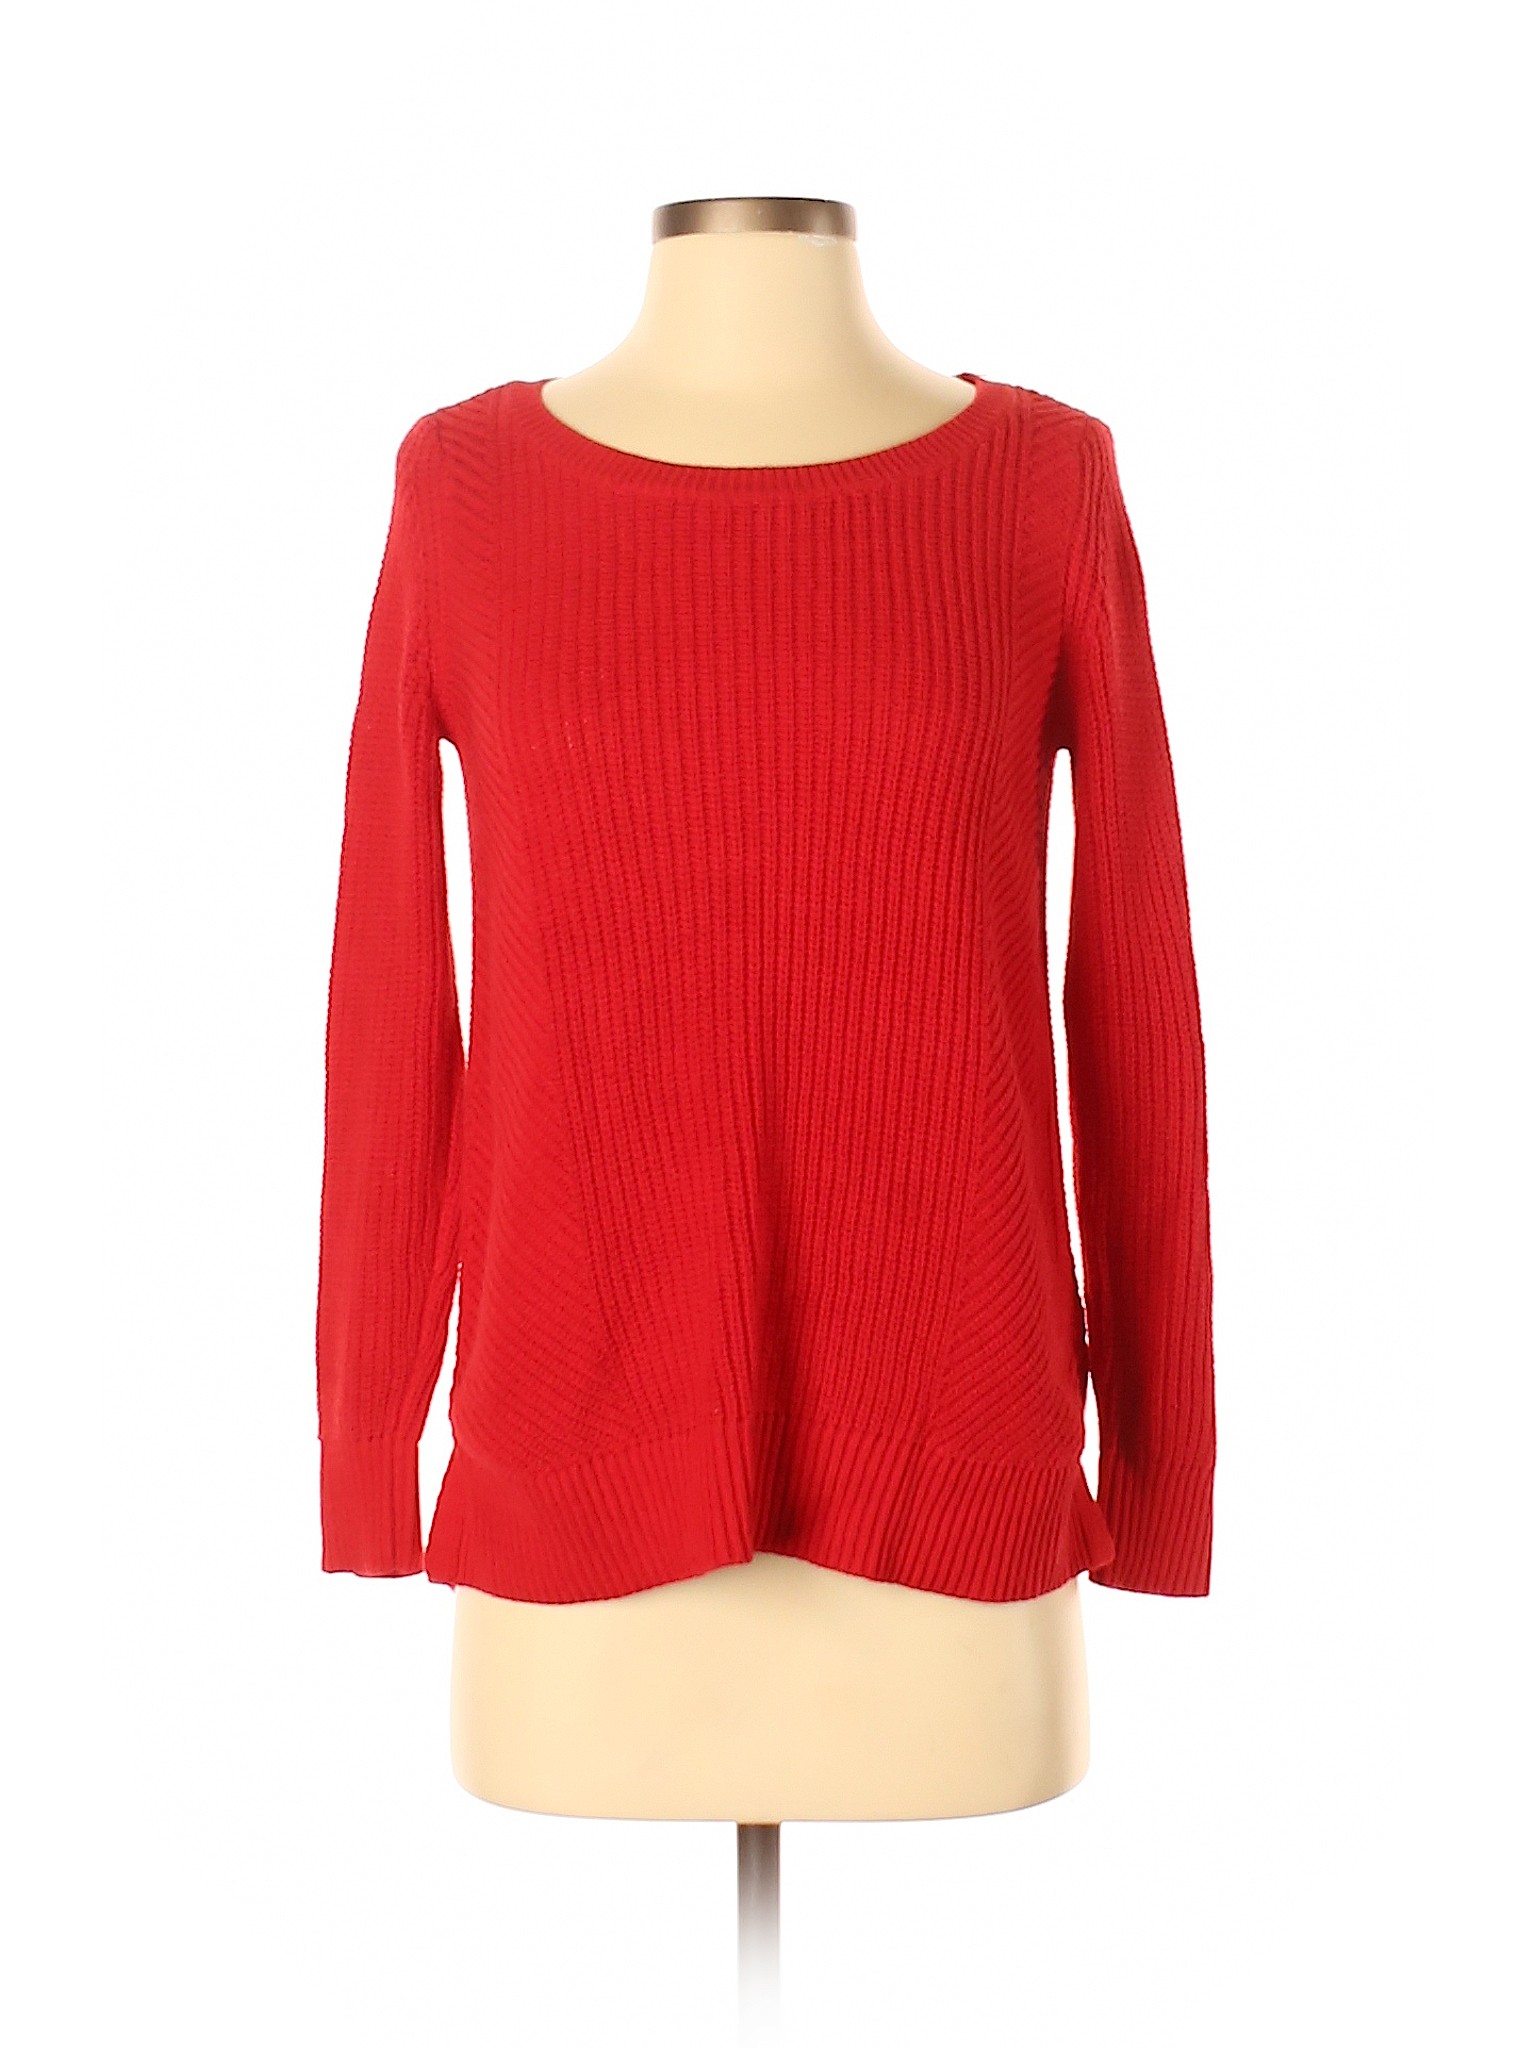 Ann Taylor LOFT 100% Cotton Solid Red Pullover Sweater Size XXS - 91% ...